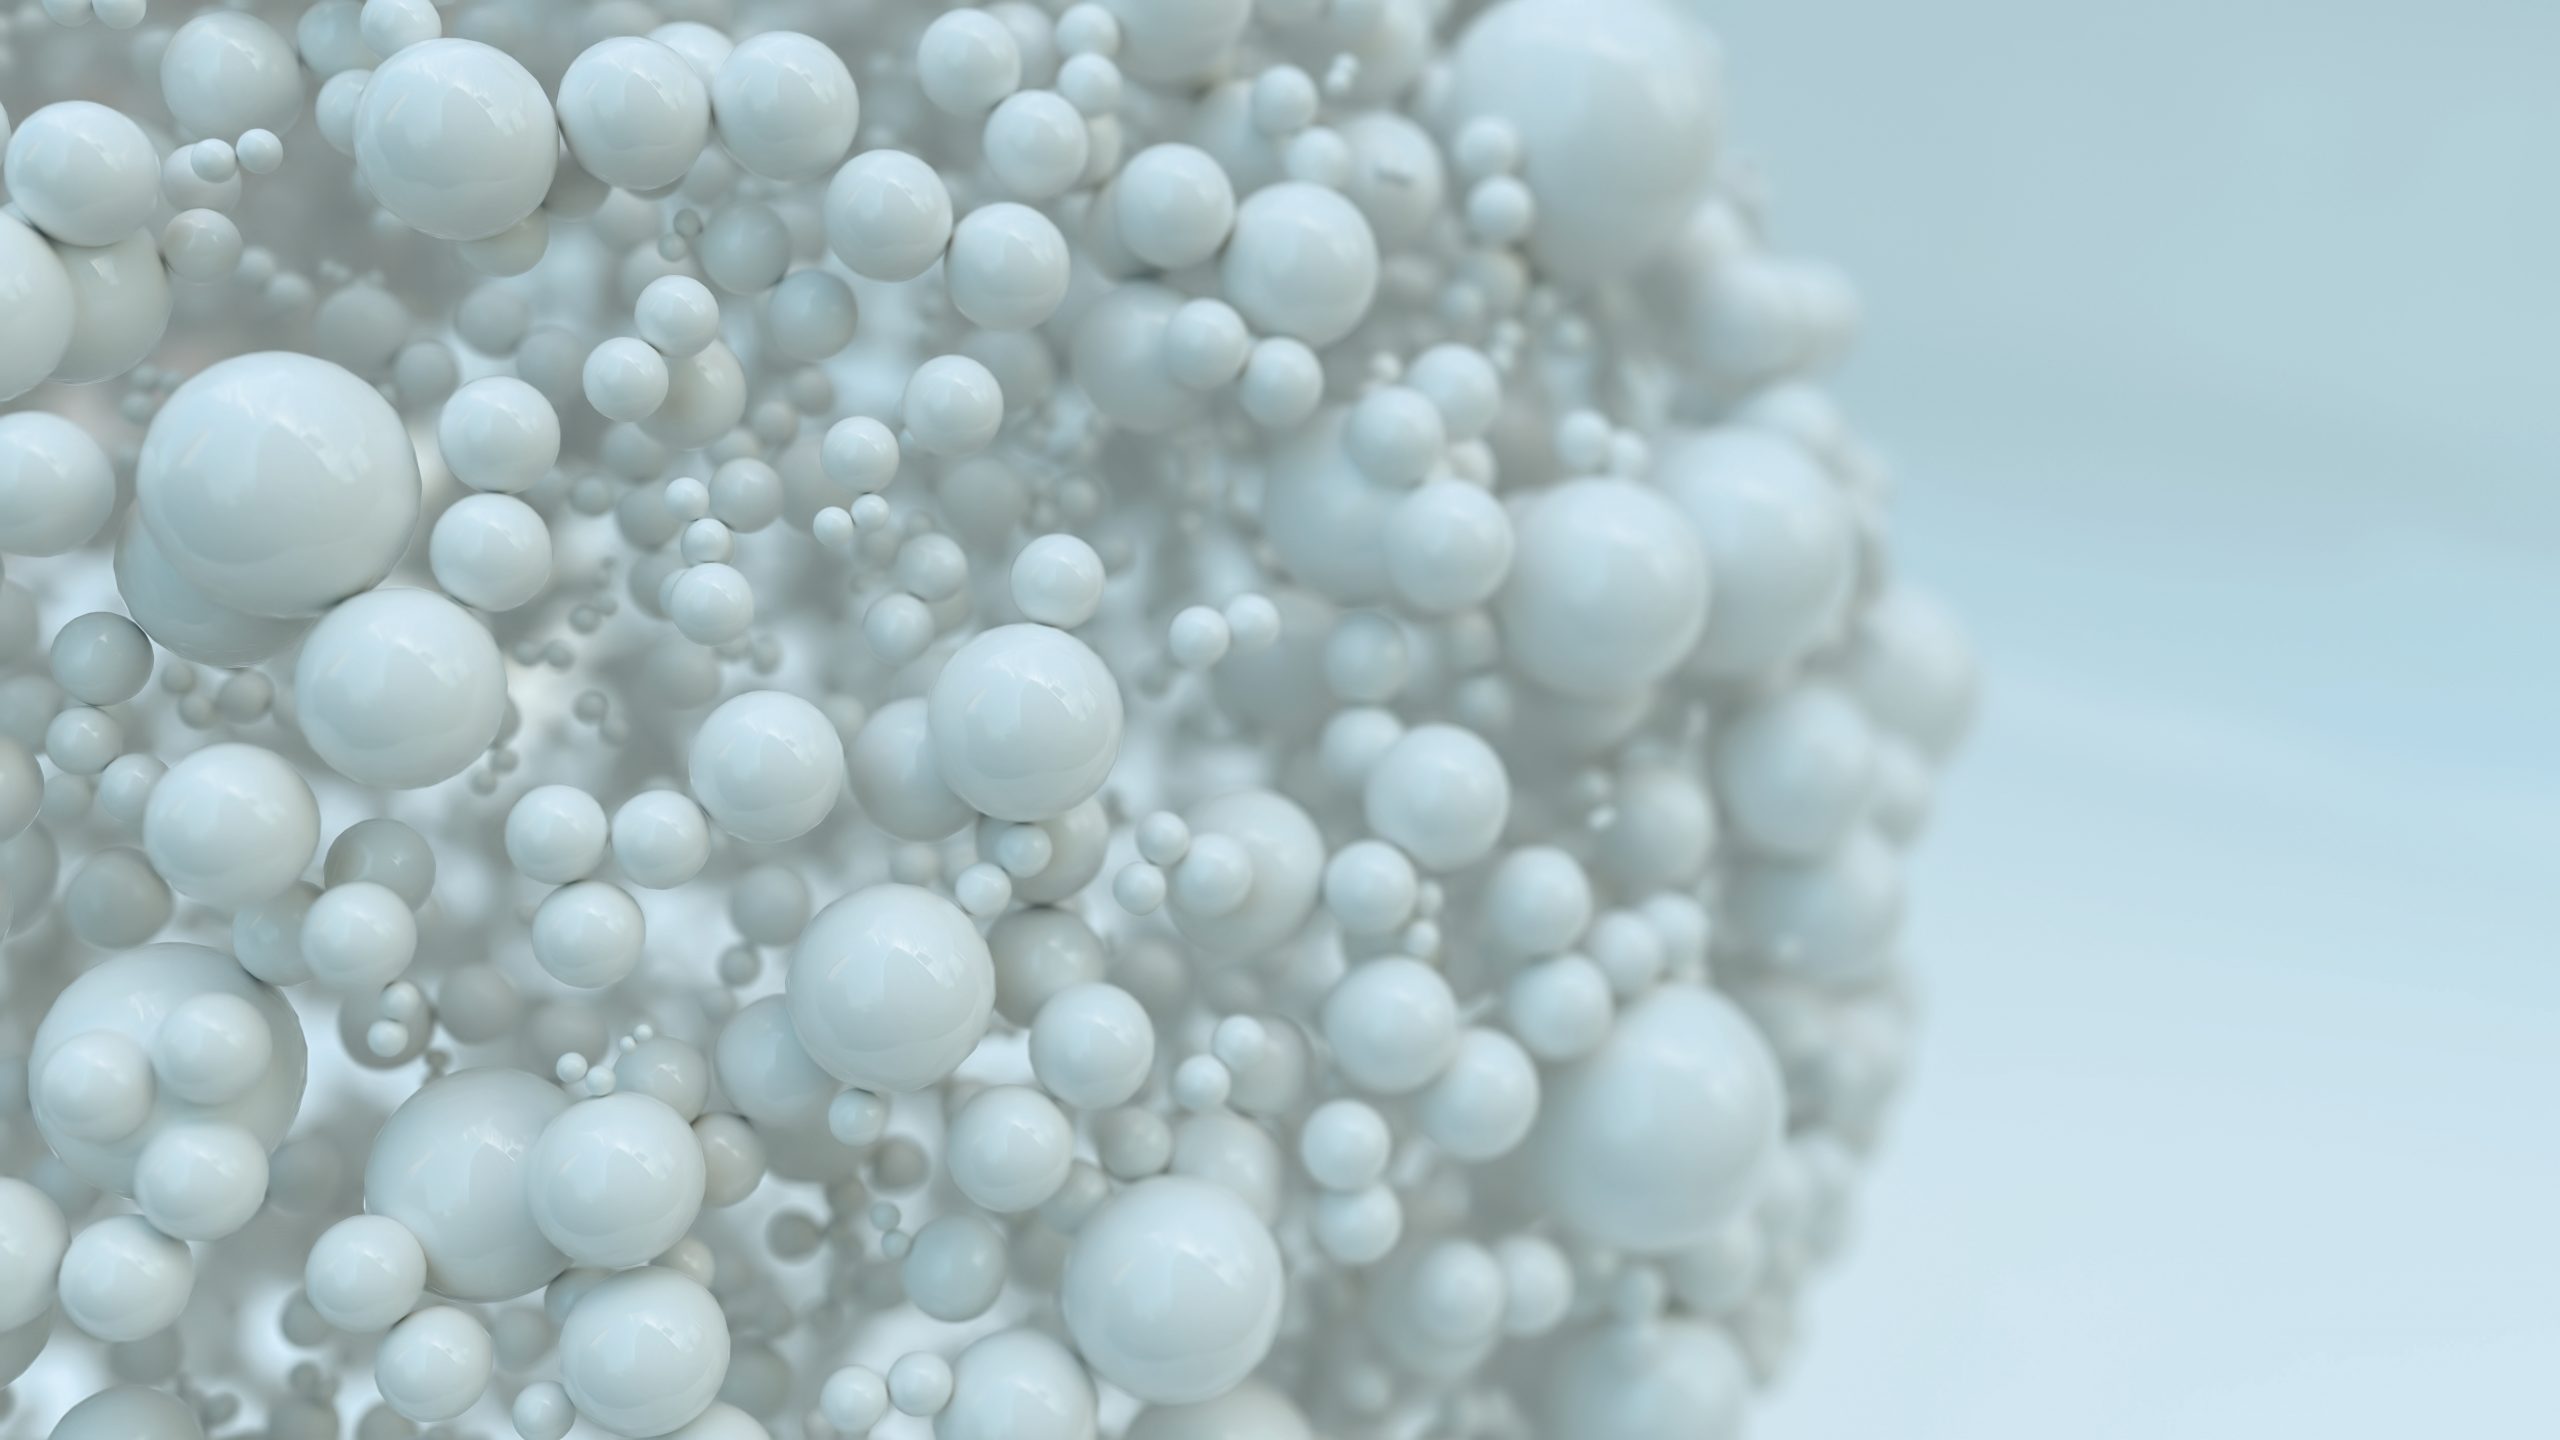 Nanoparticles on white background - 3D Rendering